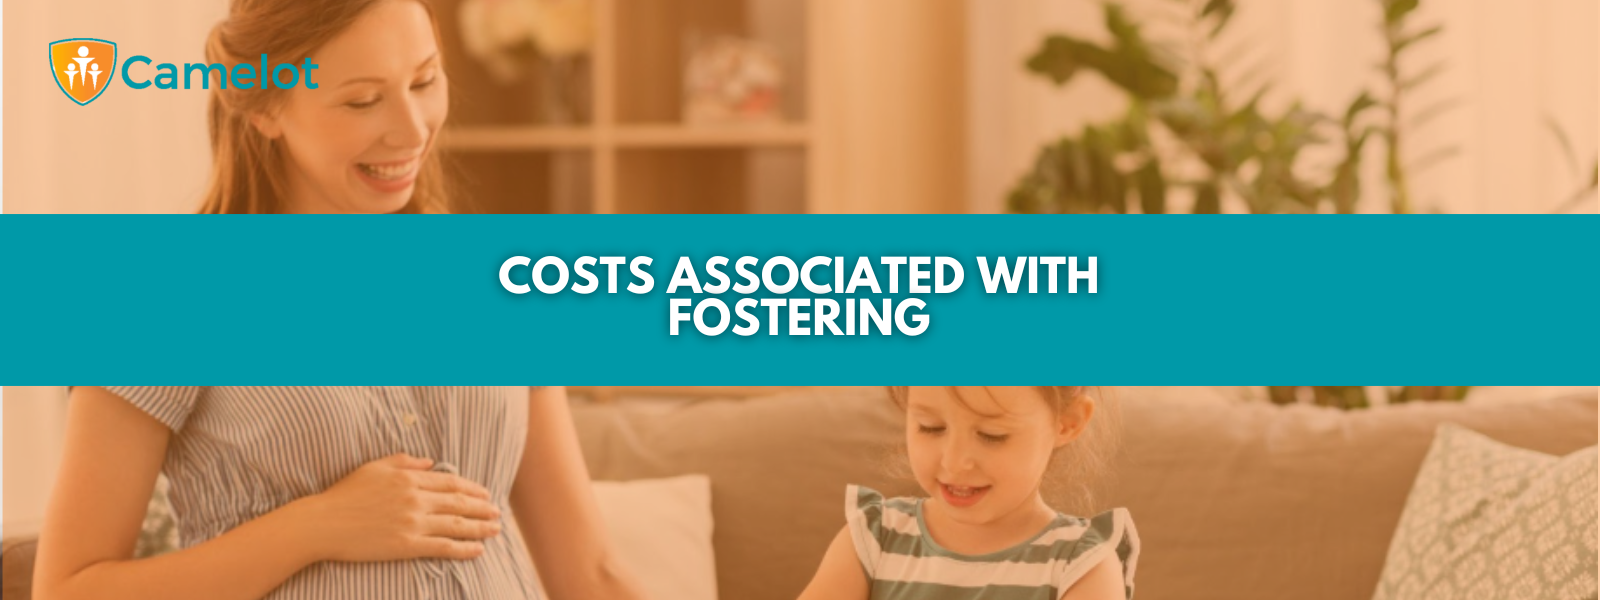 Cost of Fostering | Camelot